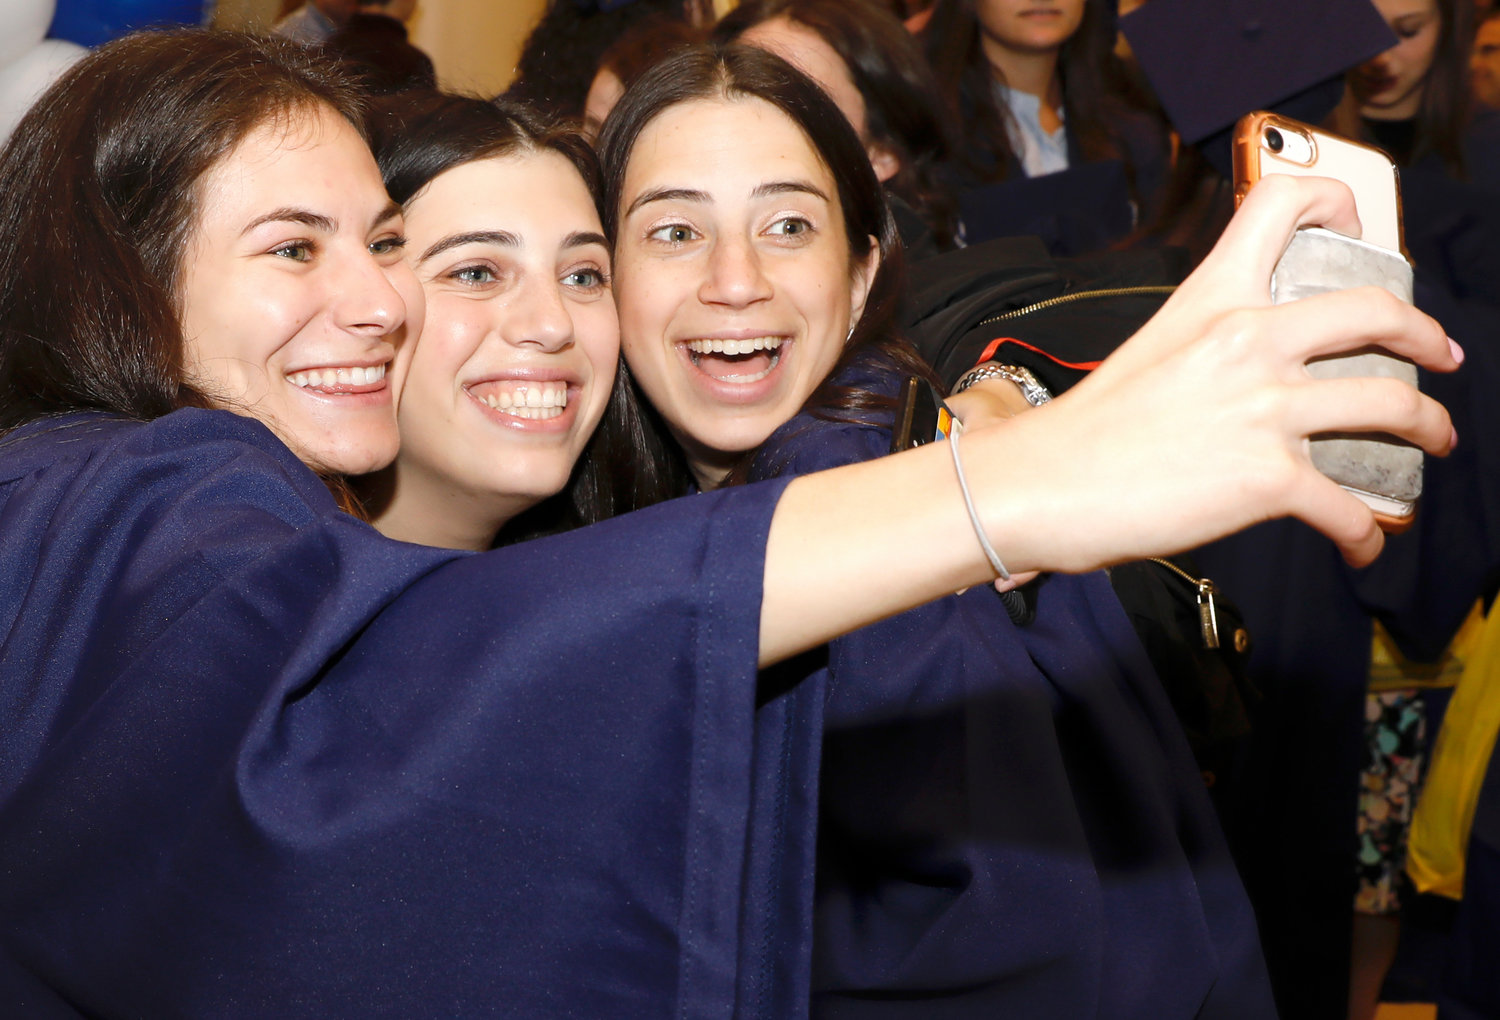 The YU commencement in Madison Square Garden was the occasion for a selfie celebration.